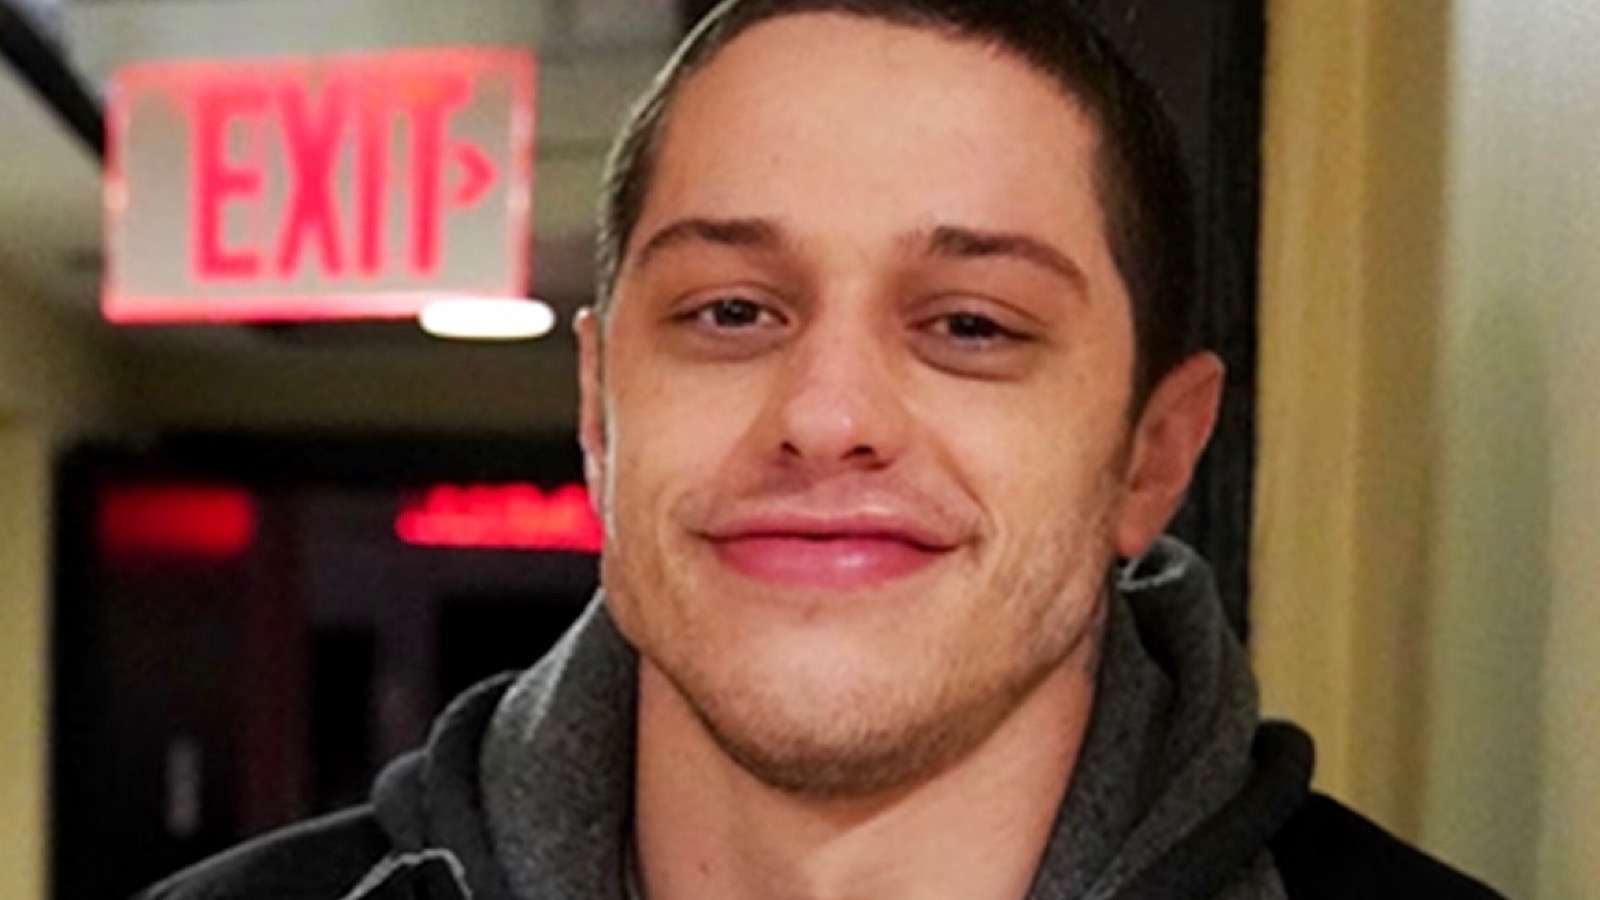 Pete Davidson to complete a variety of community service requirements after March 4 car wreck.